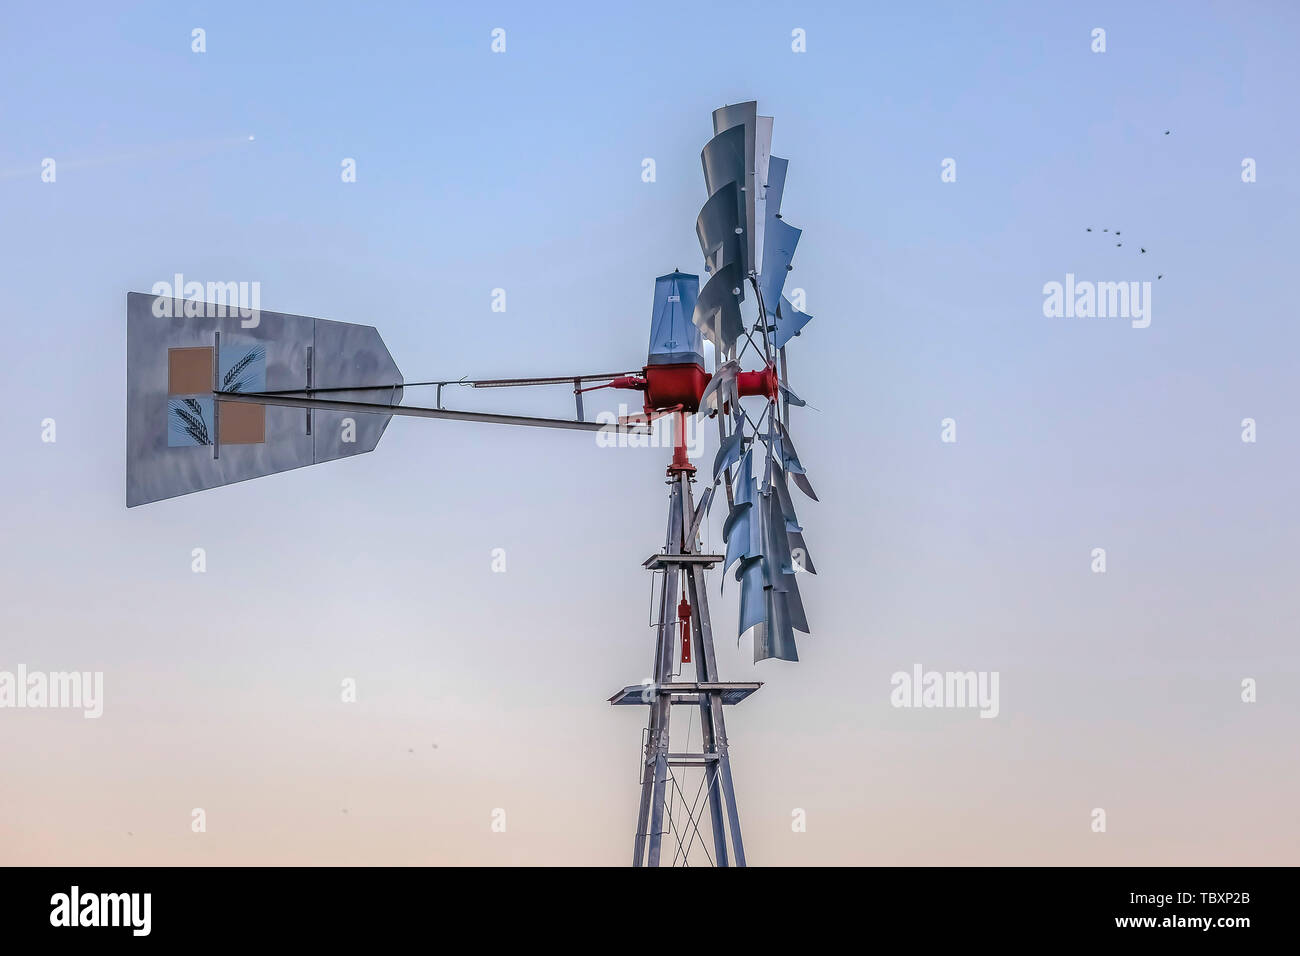 Side view of a windpump with the blades and tail connected to a red rotor hub. Stock Photo